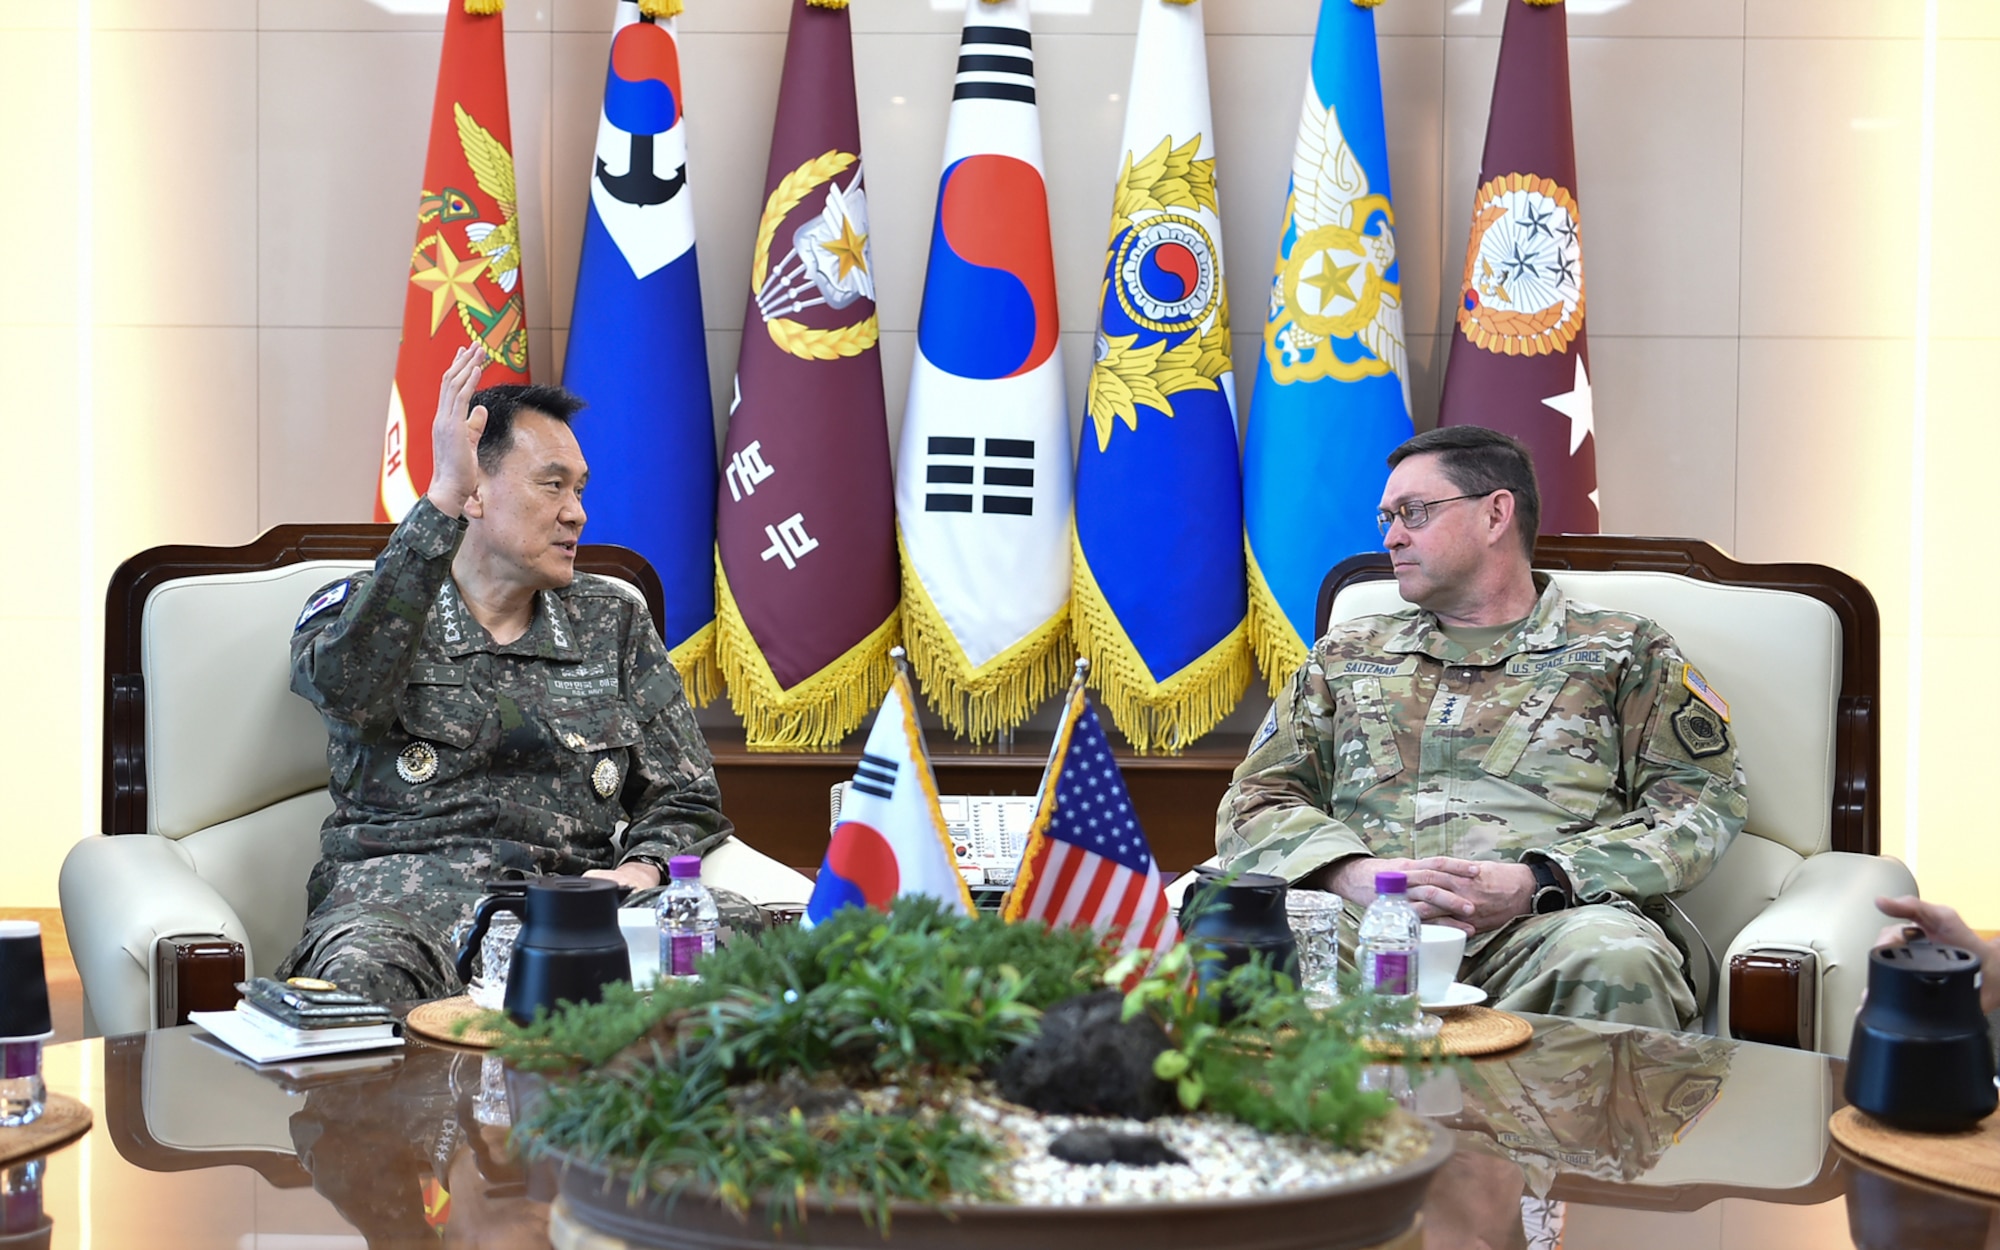 Republic of Korea Adm. Kim, Myung-Soo, Chairman of the Joint Chiefs of Staff, discusses the integration between ROK and U.S. space personnel and operations during a meeting with U.S. Space Force Gen. Chance Saltzman, Chief of Space Operations, in Seoul, ROK, May 7, 2024.